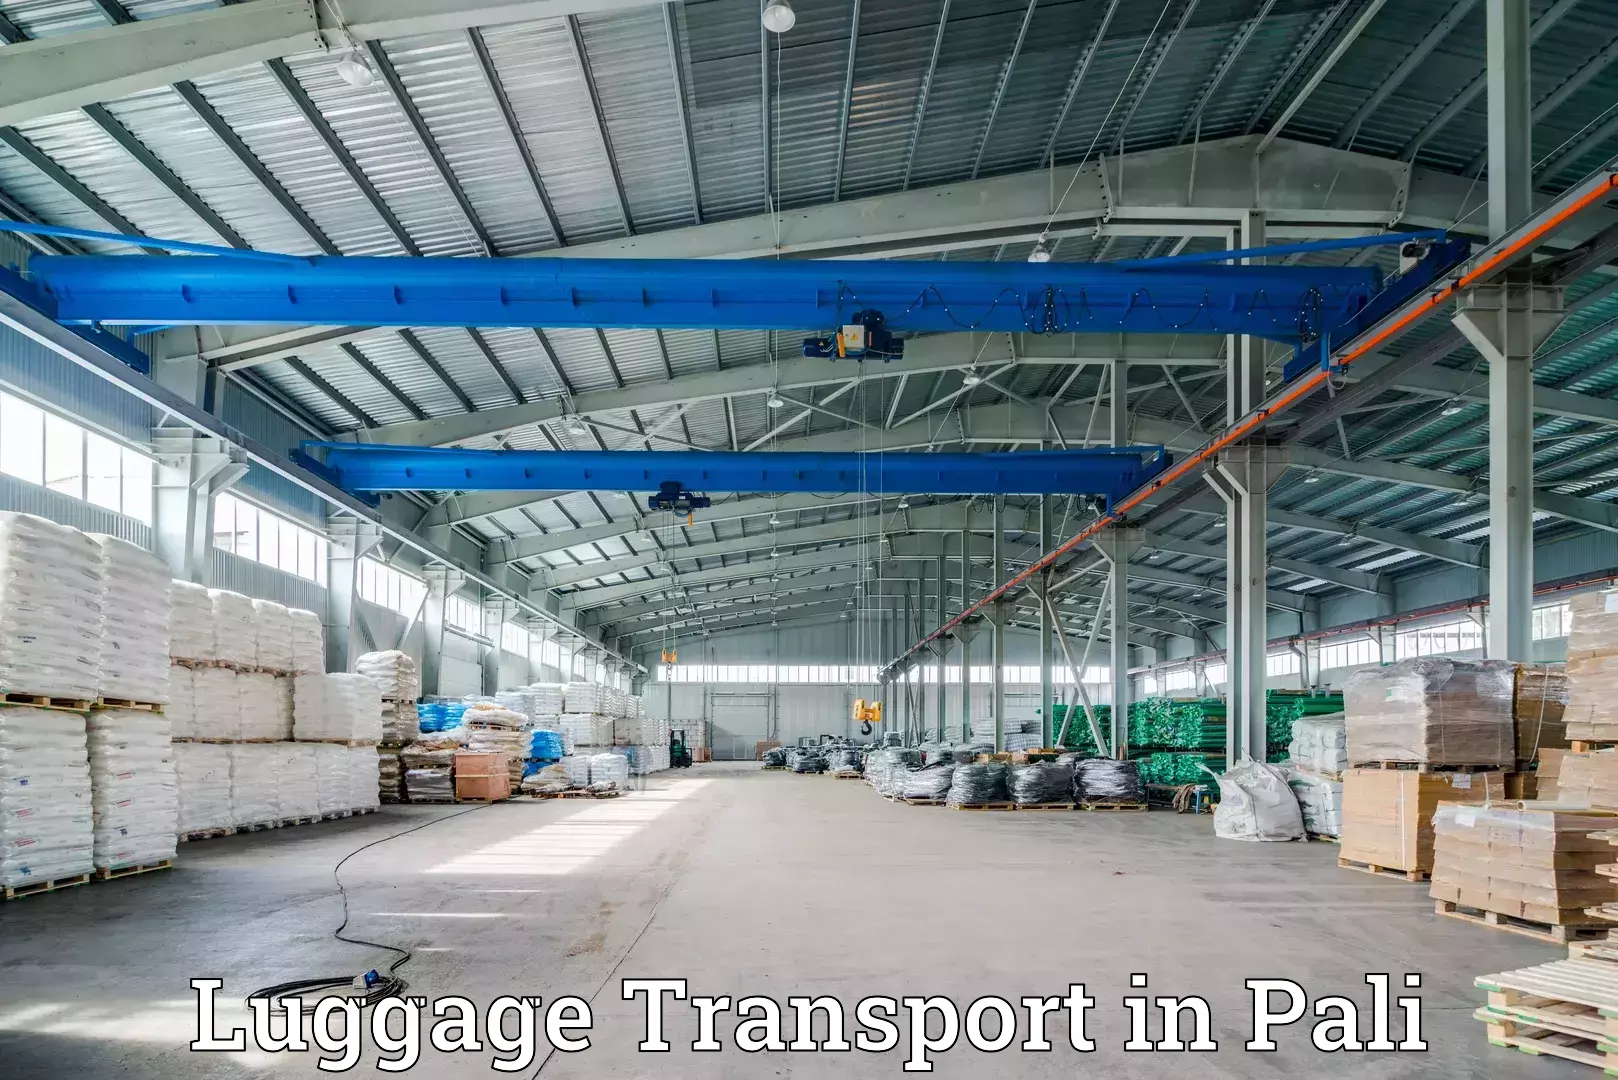 Discounted baggage transport in Pali